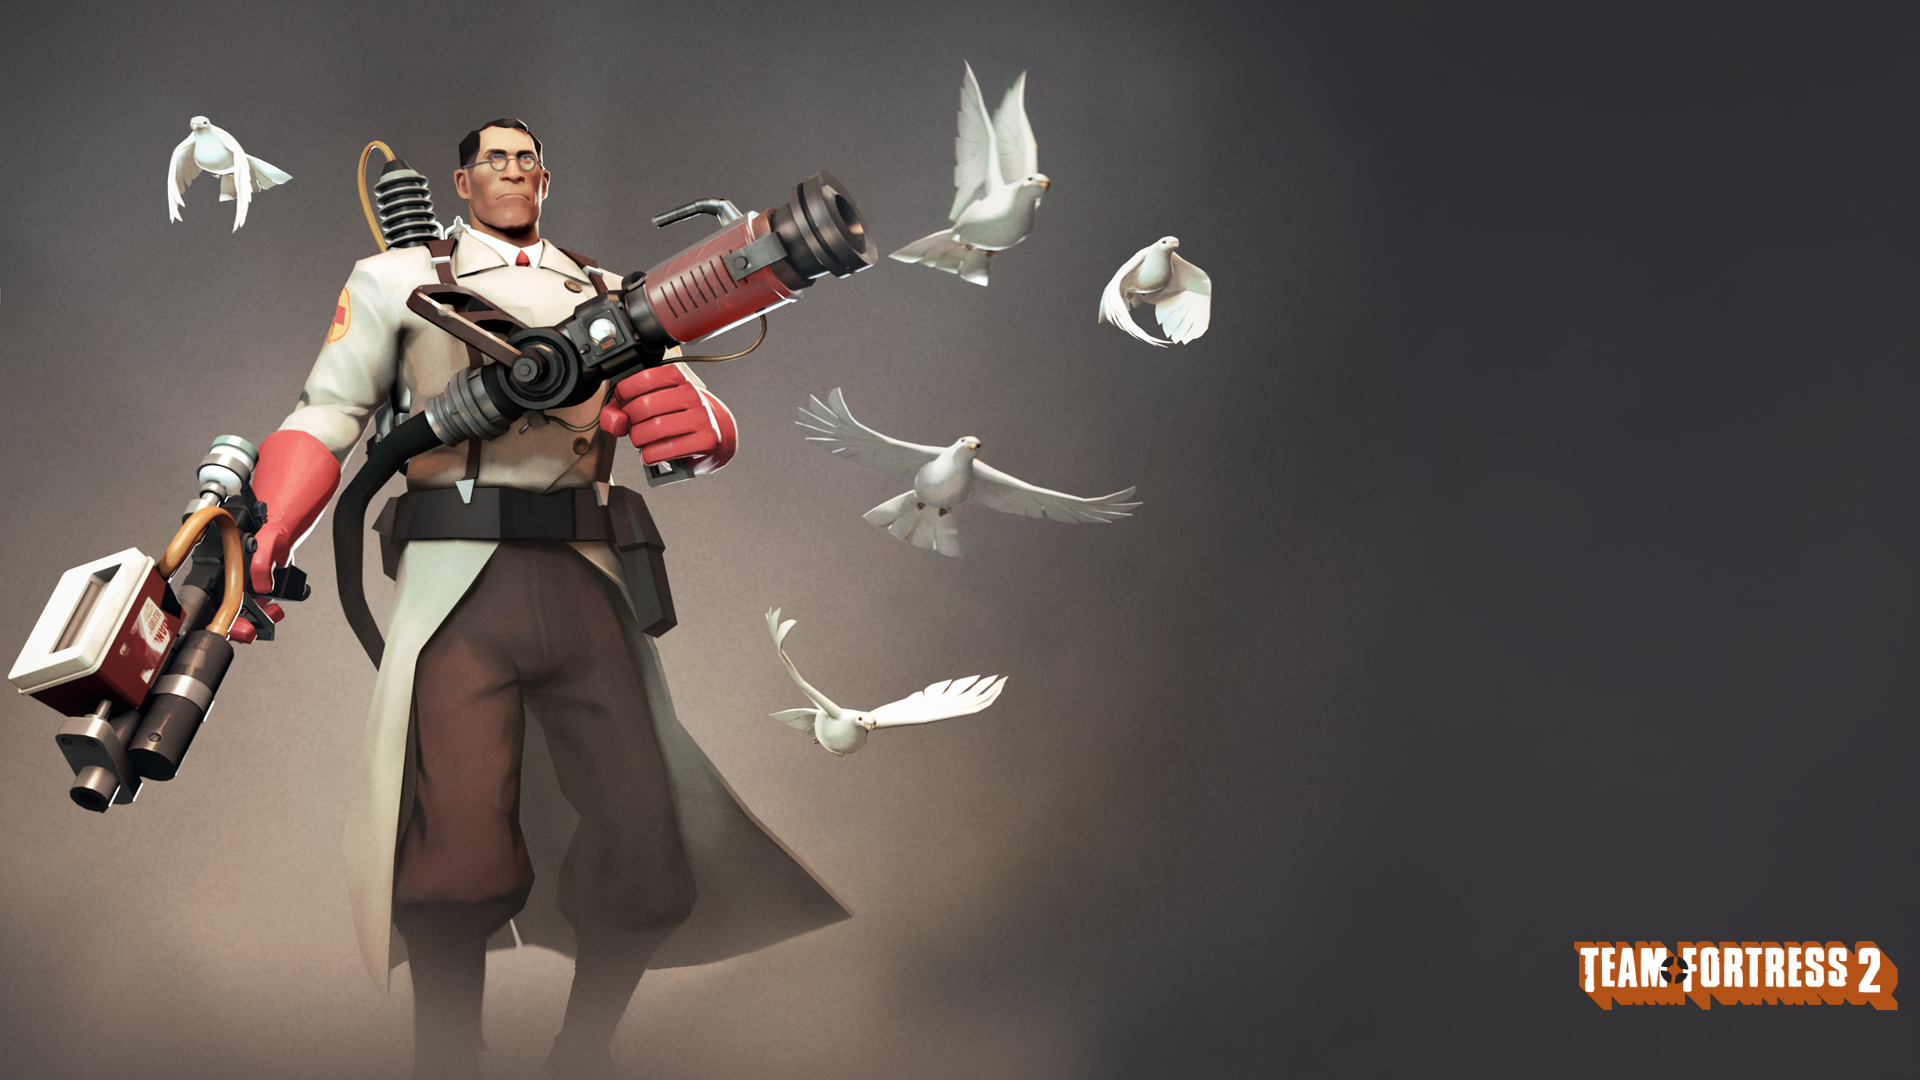 Tf2 Wallpaper Games File Size Mb Tags